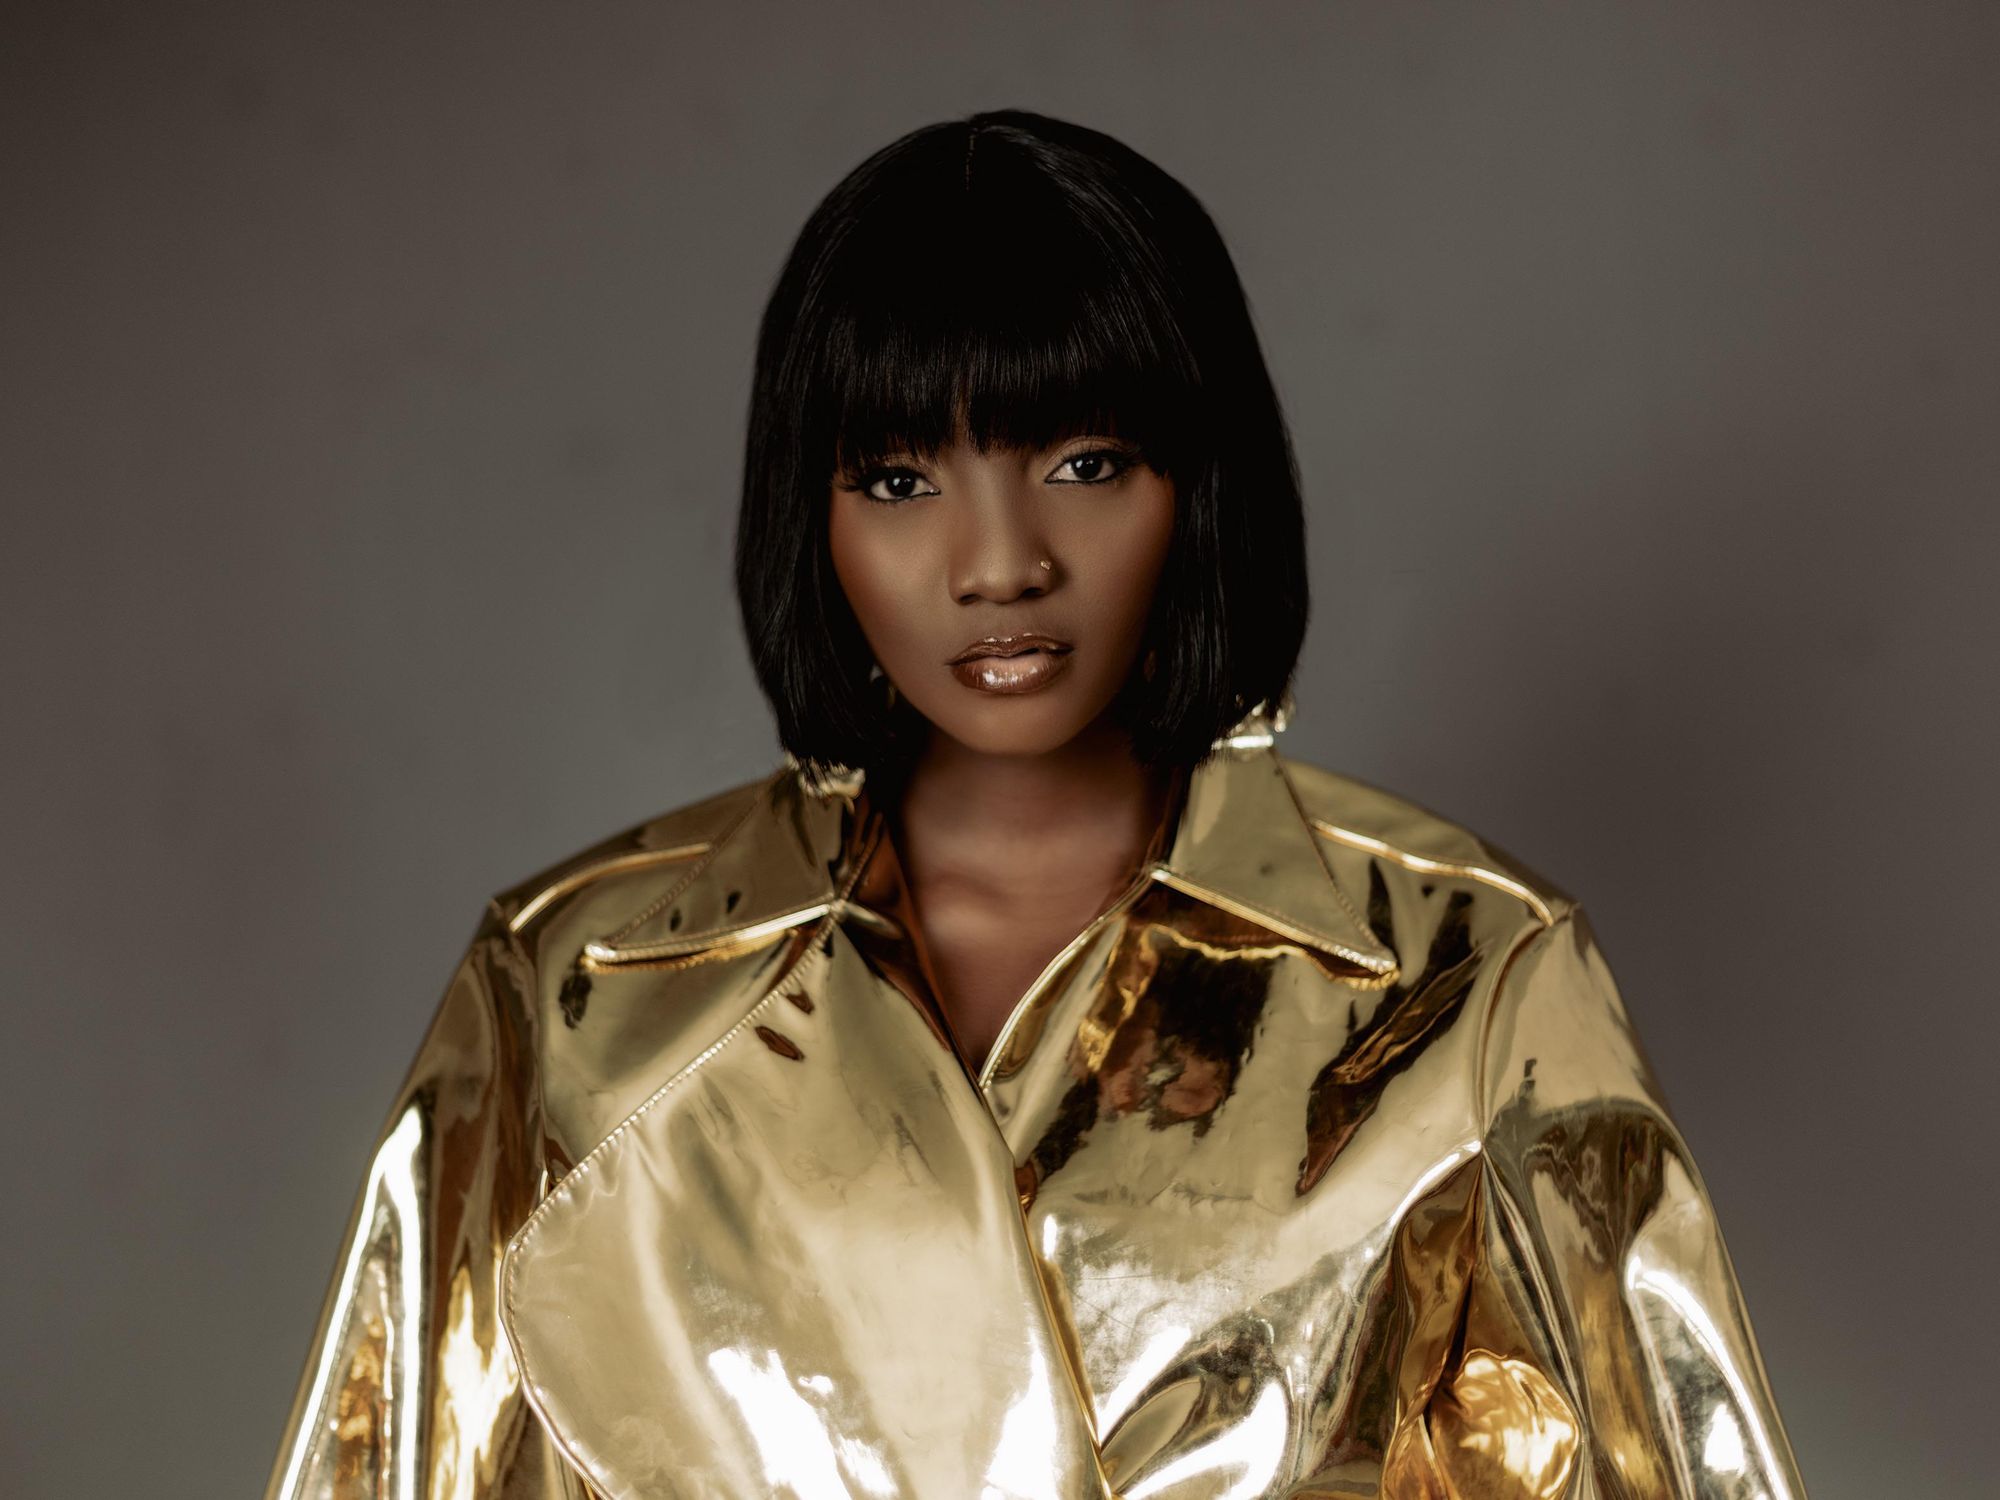 Pictured: Nigerian singer and producer Simi releases her new album "To Be Honest"